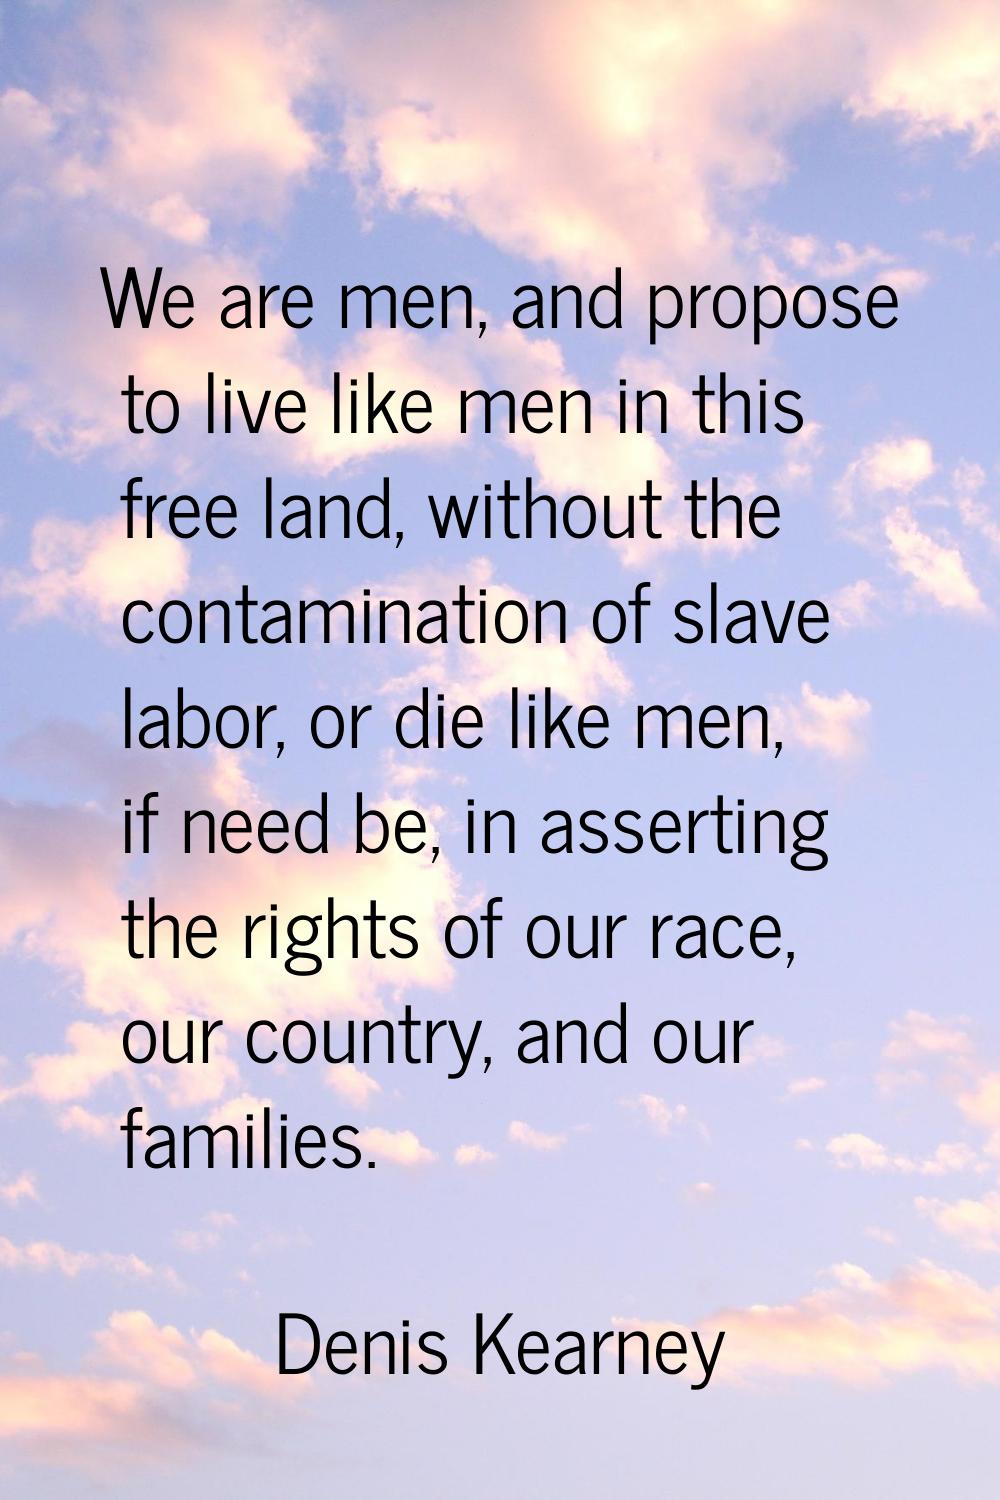 We are men, and propose to live like men in this free land, without the contamination of slave labo